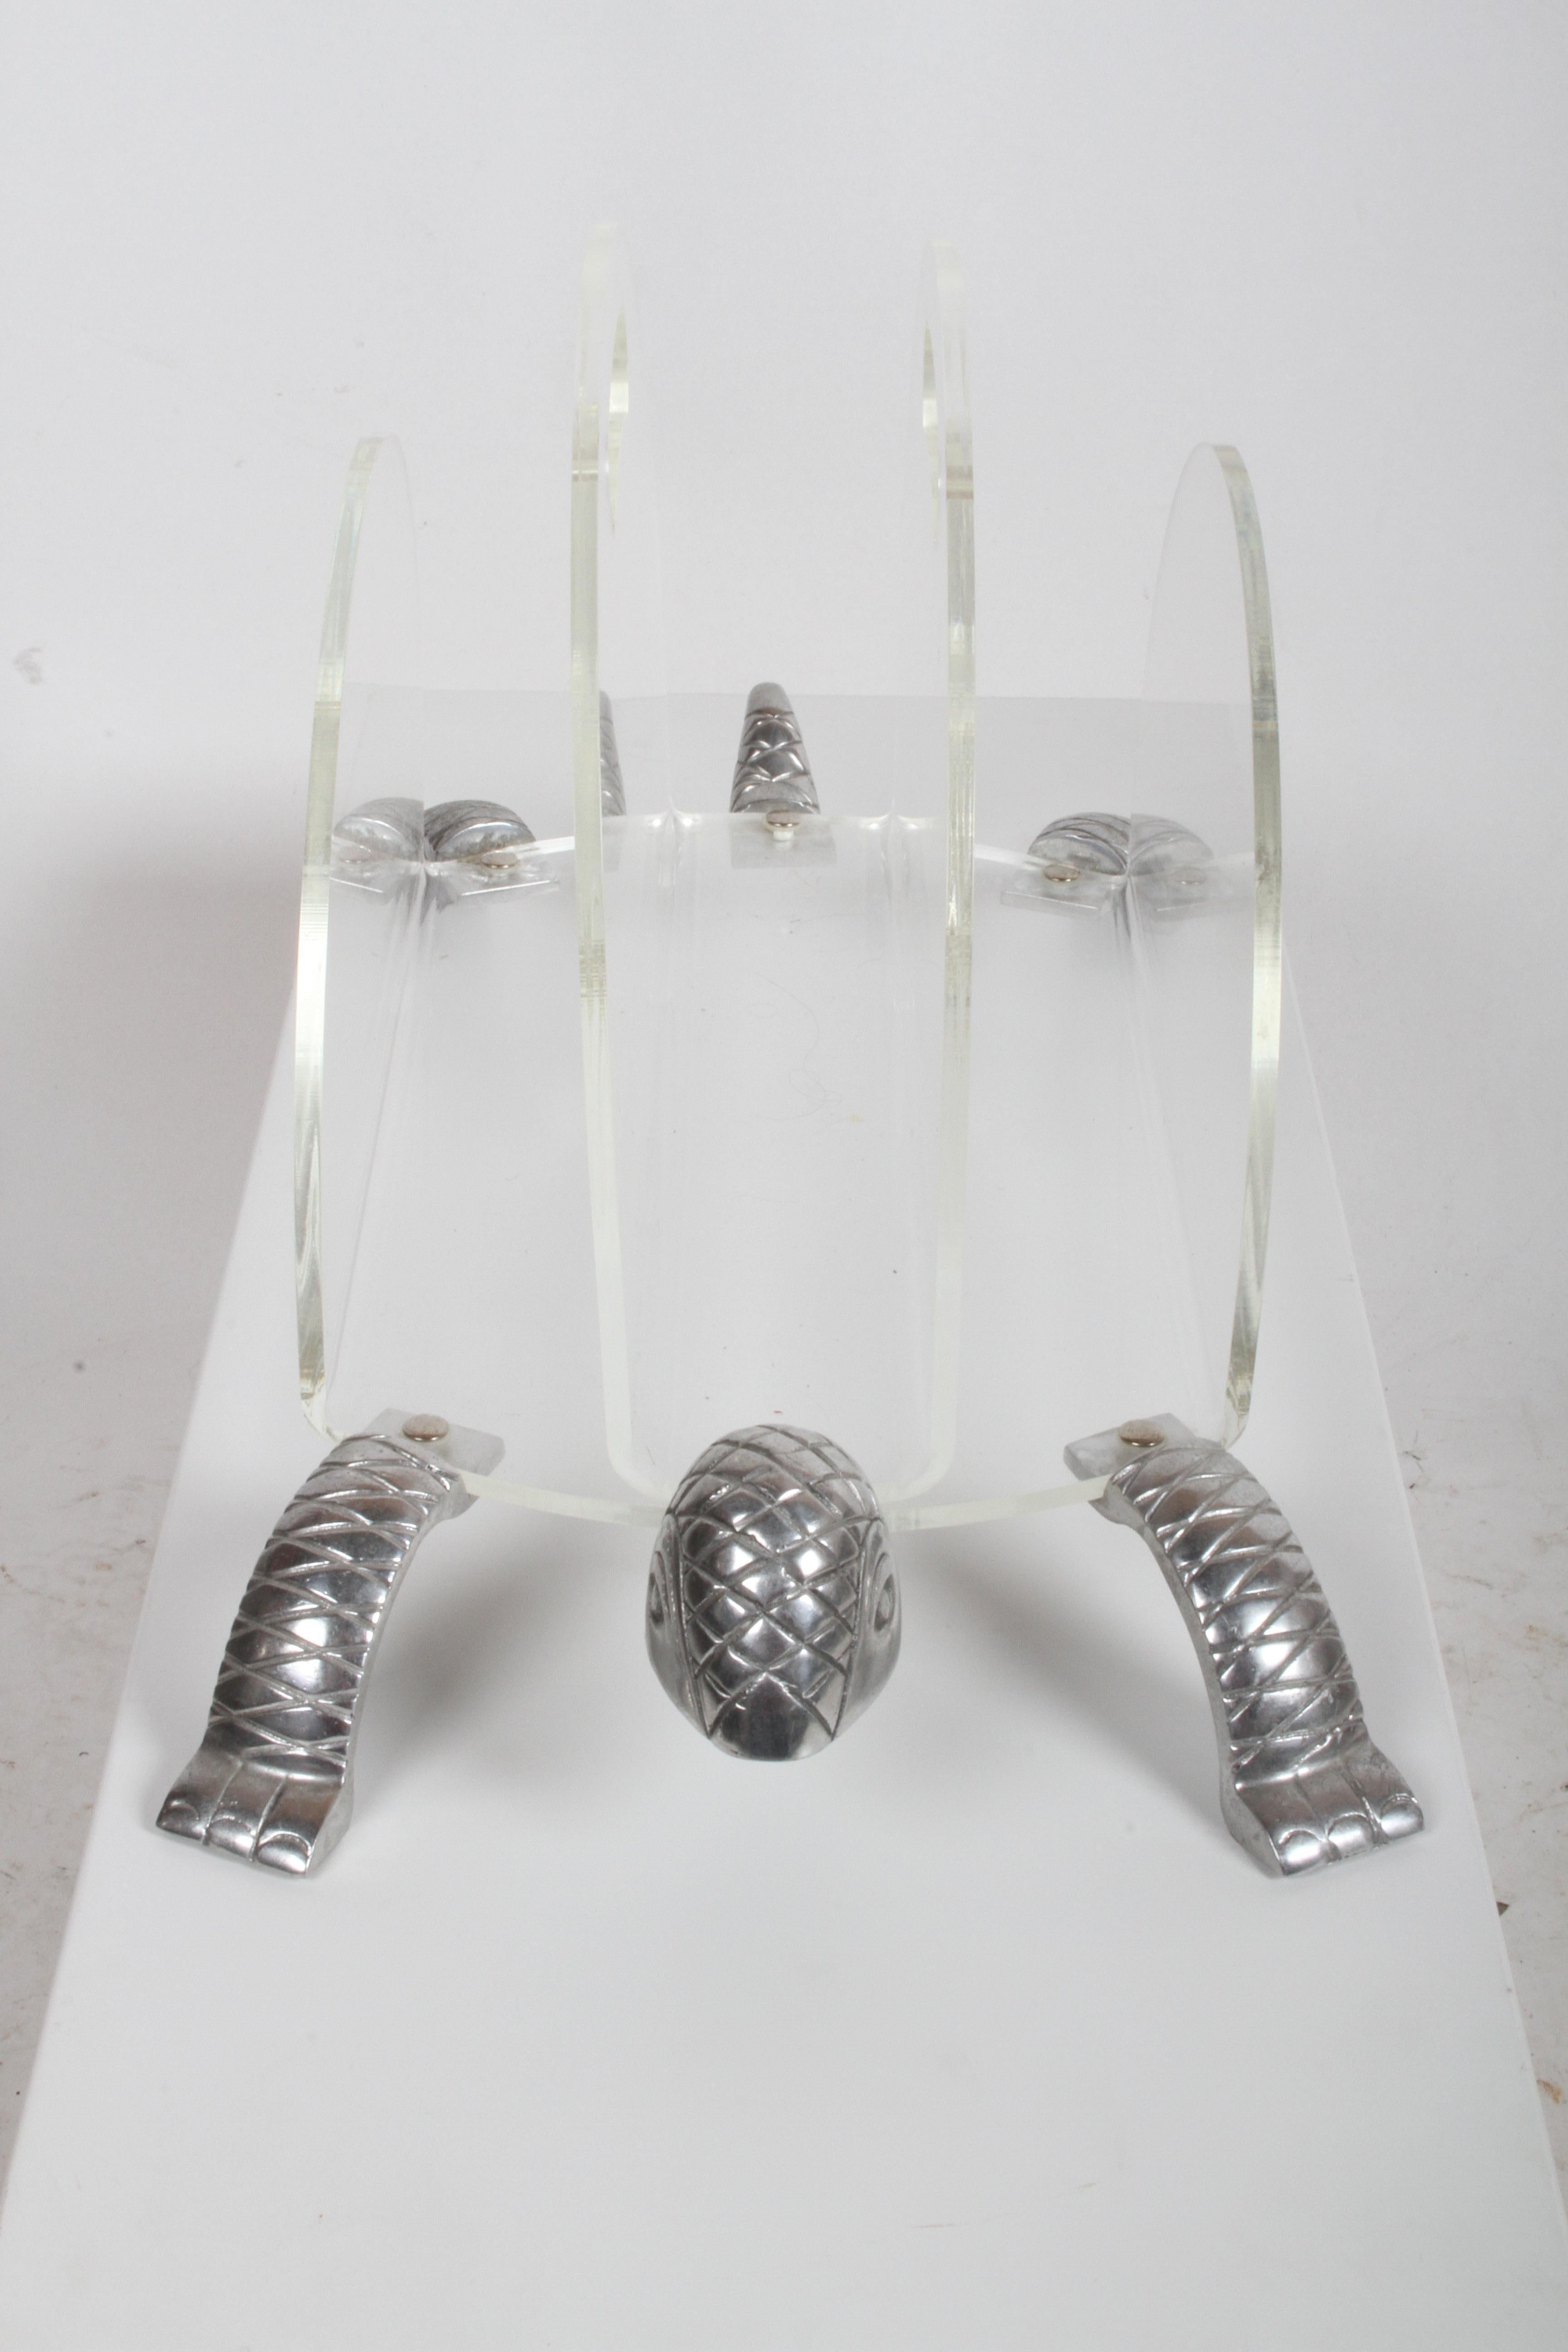 1970s Arthur Court aluminum turtle and Lucite magazine rack or holder. Minor scuffs to Lucite, nice condition.